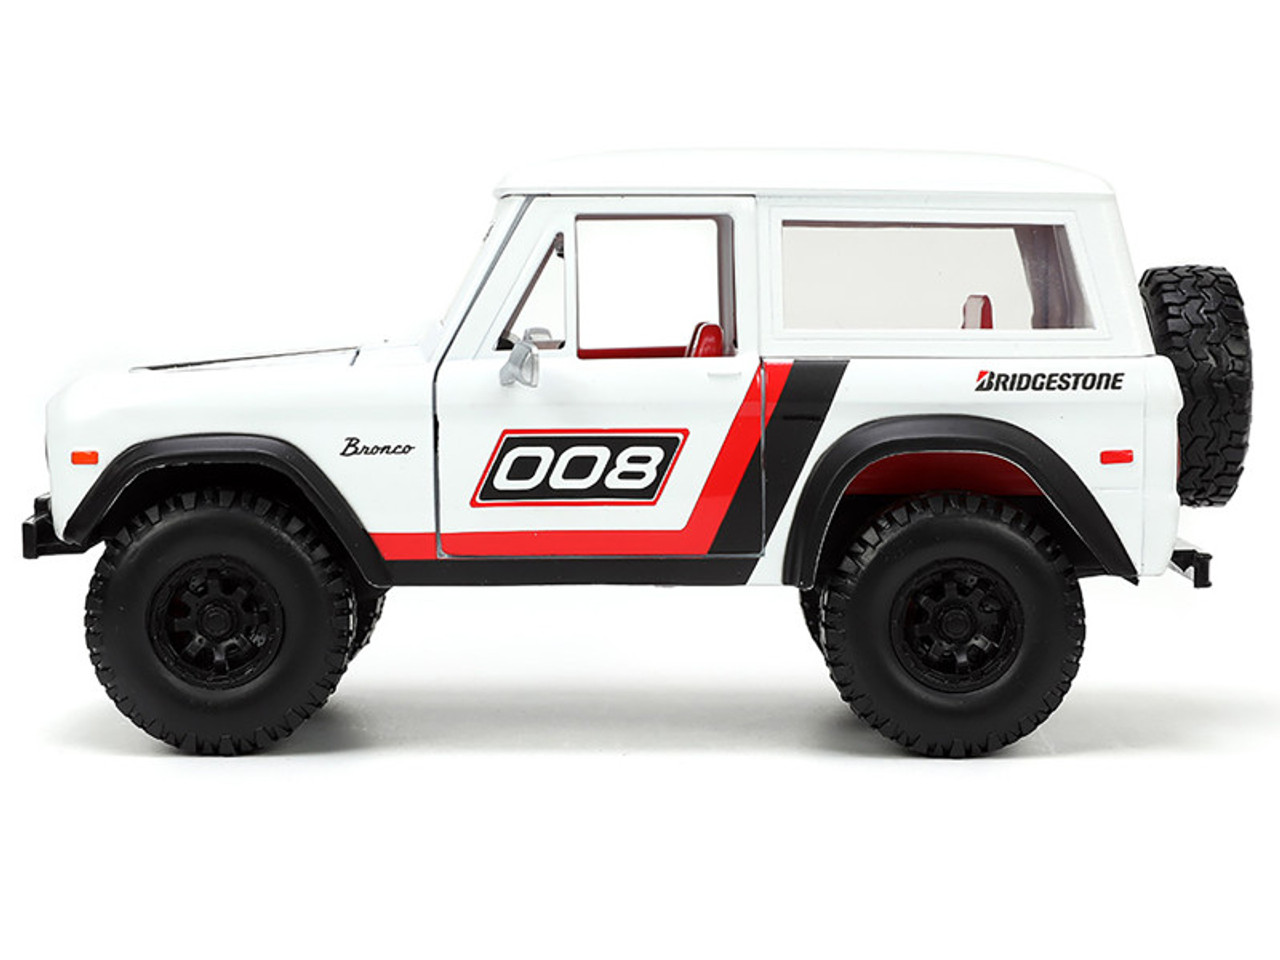 1973 Ford Bronco #008 White with Red and Black Stripes and Red Interior with Extra Wheels "Just Trucks" Series 1/24 Diecast Model Car by Jada